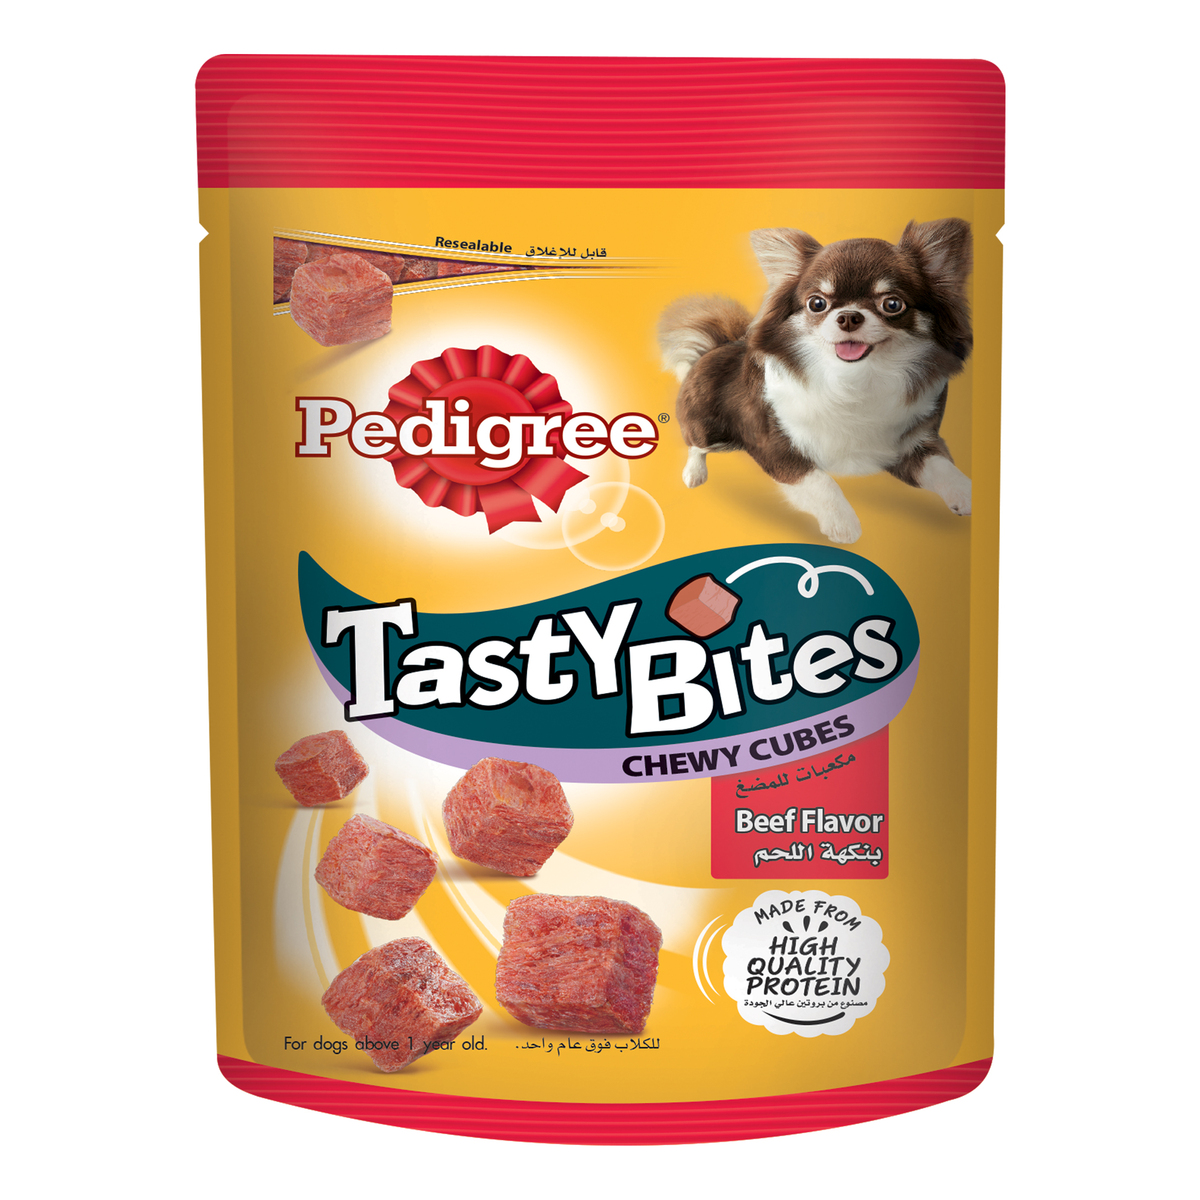 Pedigree Tasty Bites Chewy Cubes Beef 50g